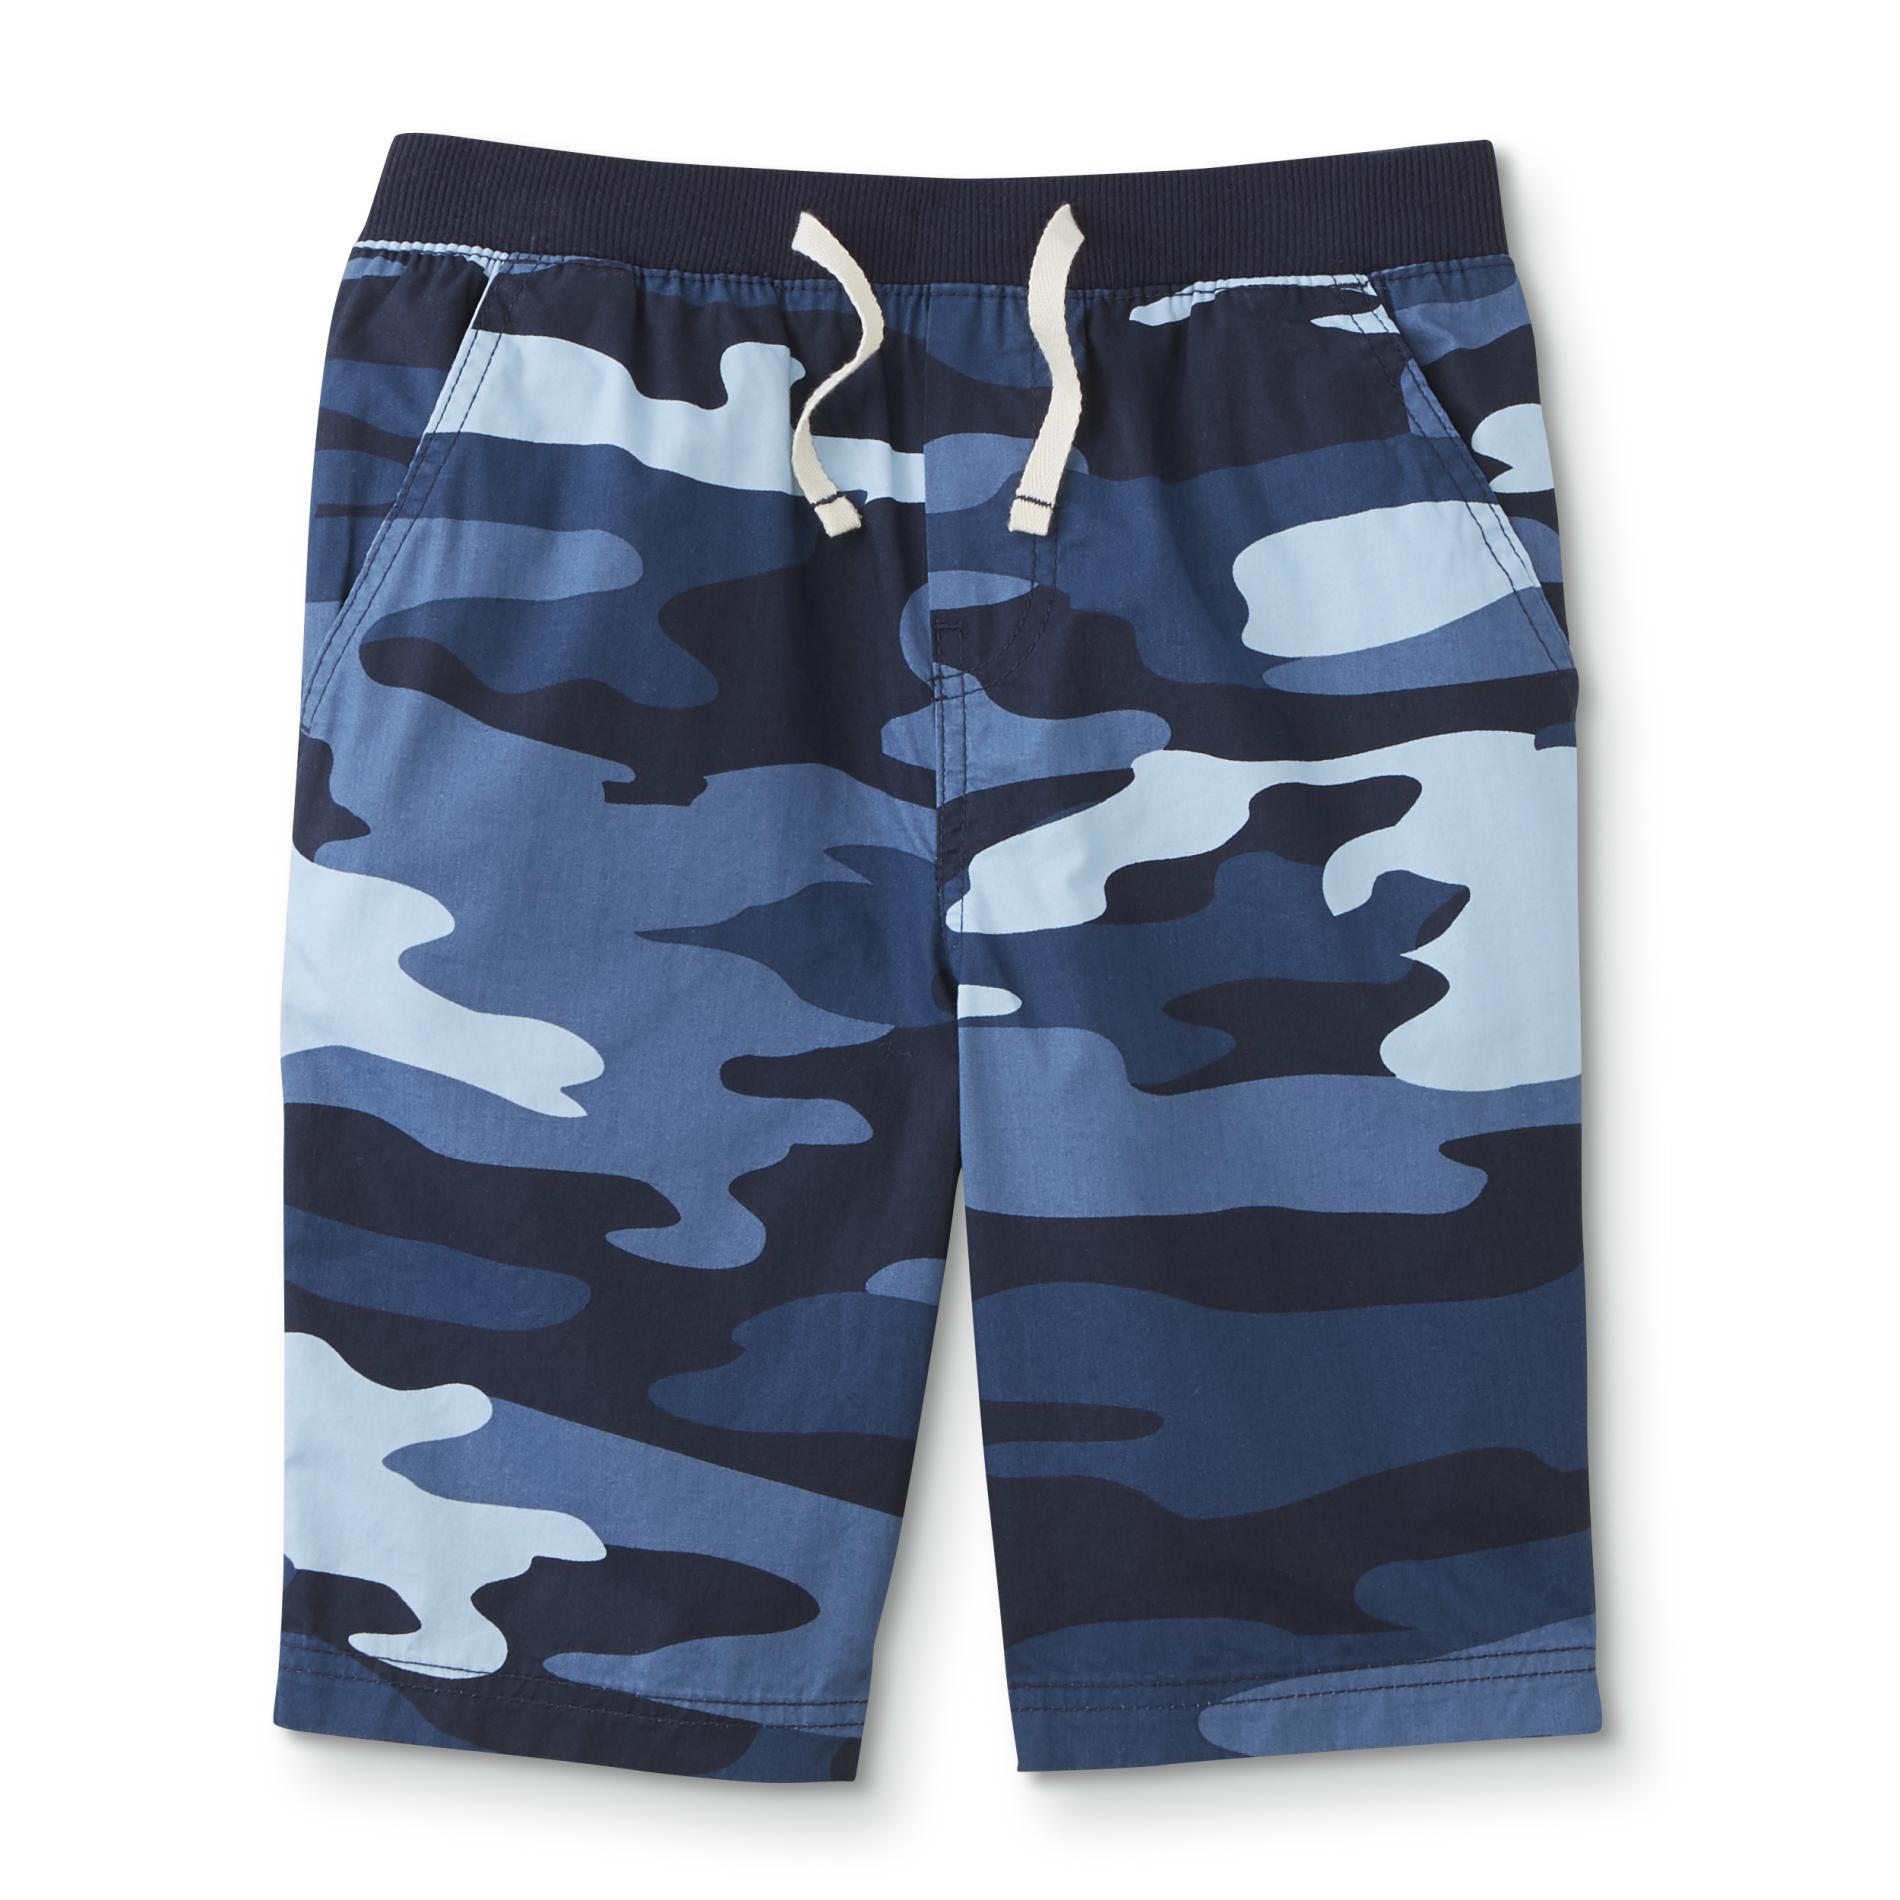 Simply Styled Boys' Shorts - Camouflage